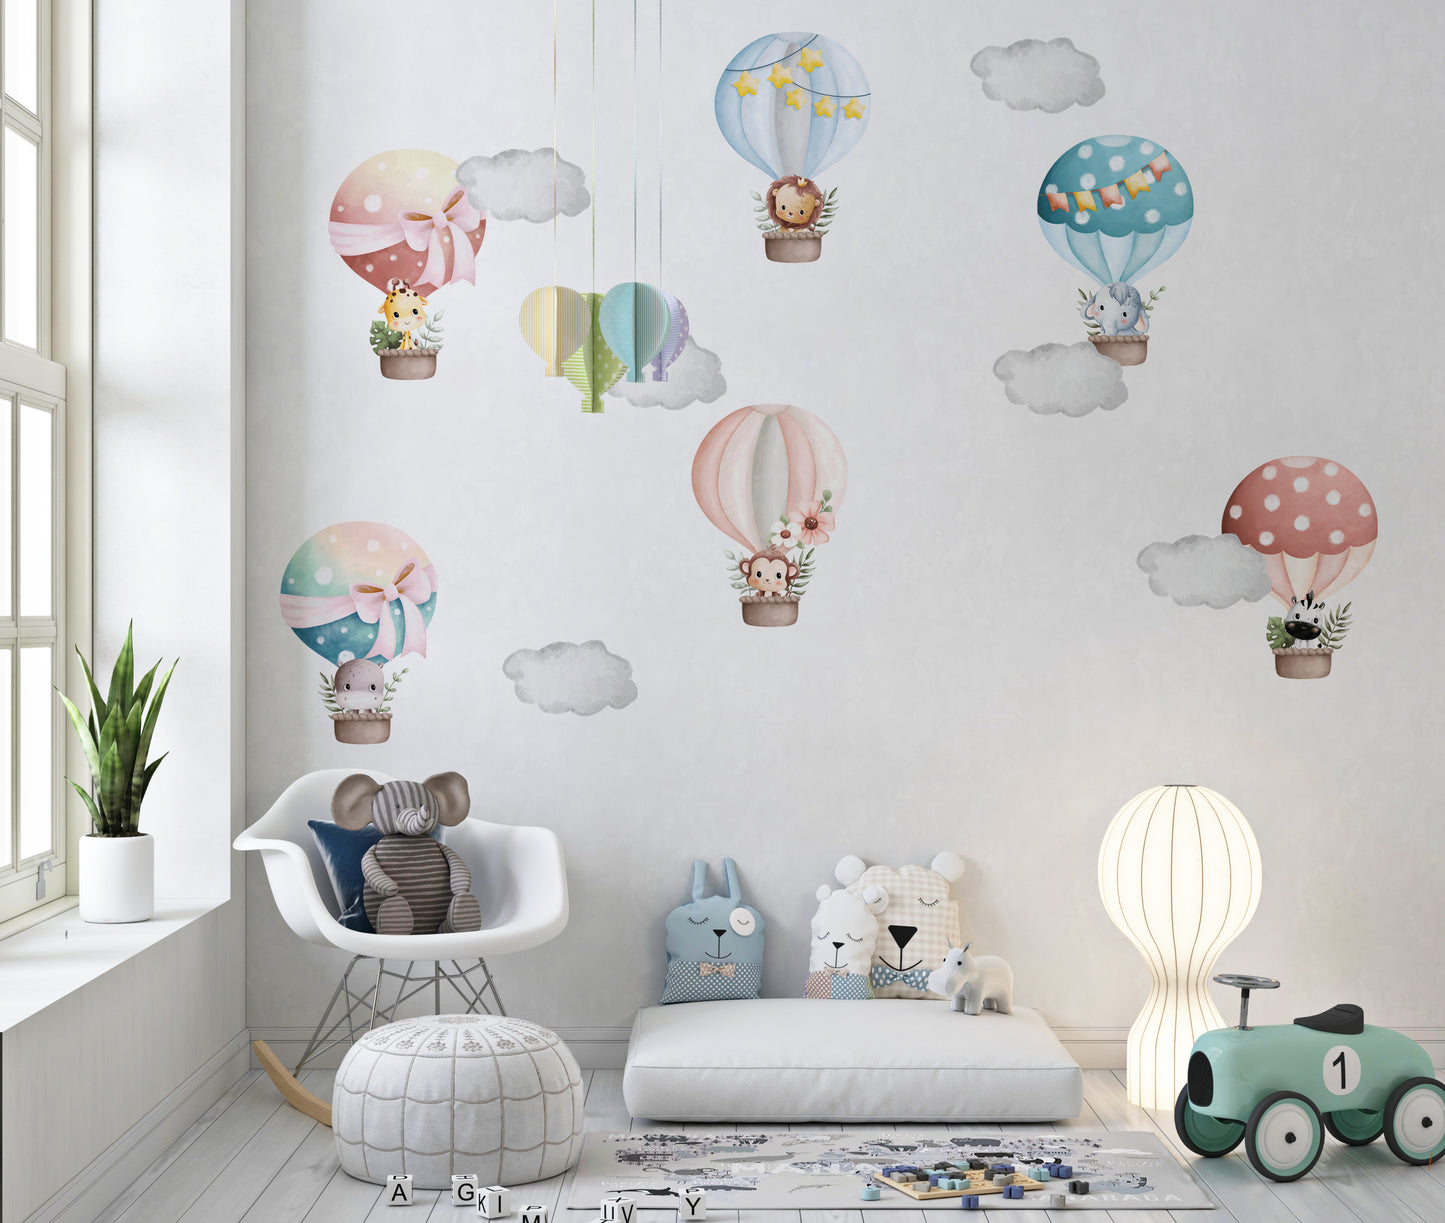 Colorful Hot Air Balloons with Animals